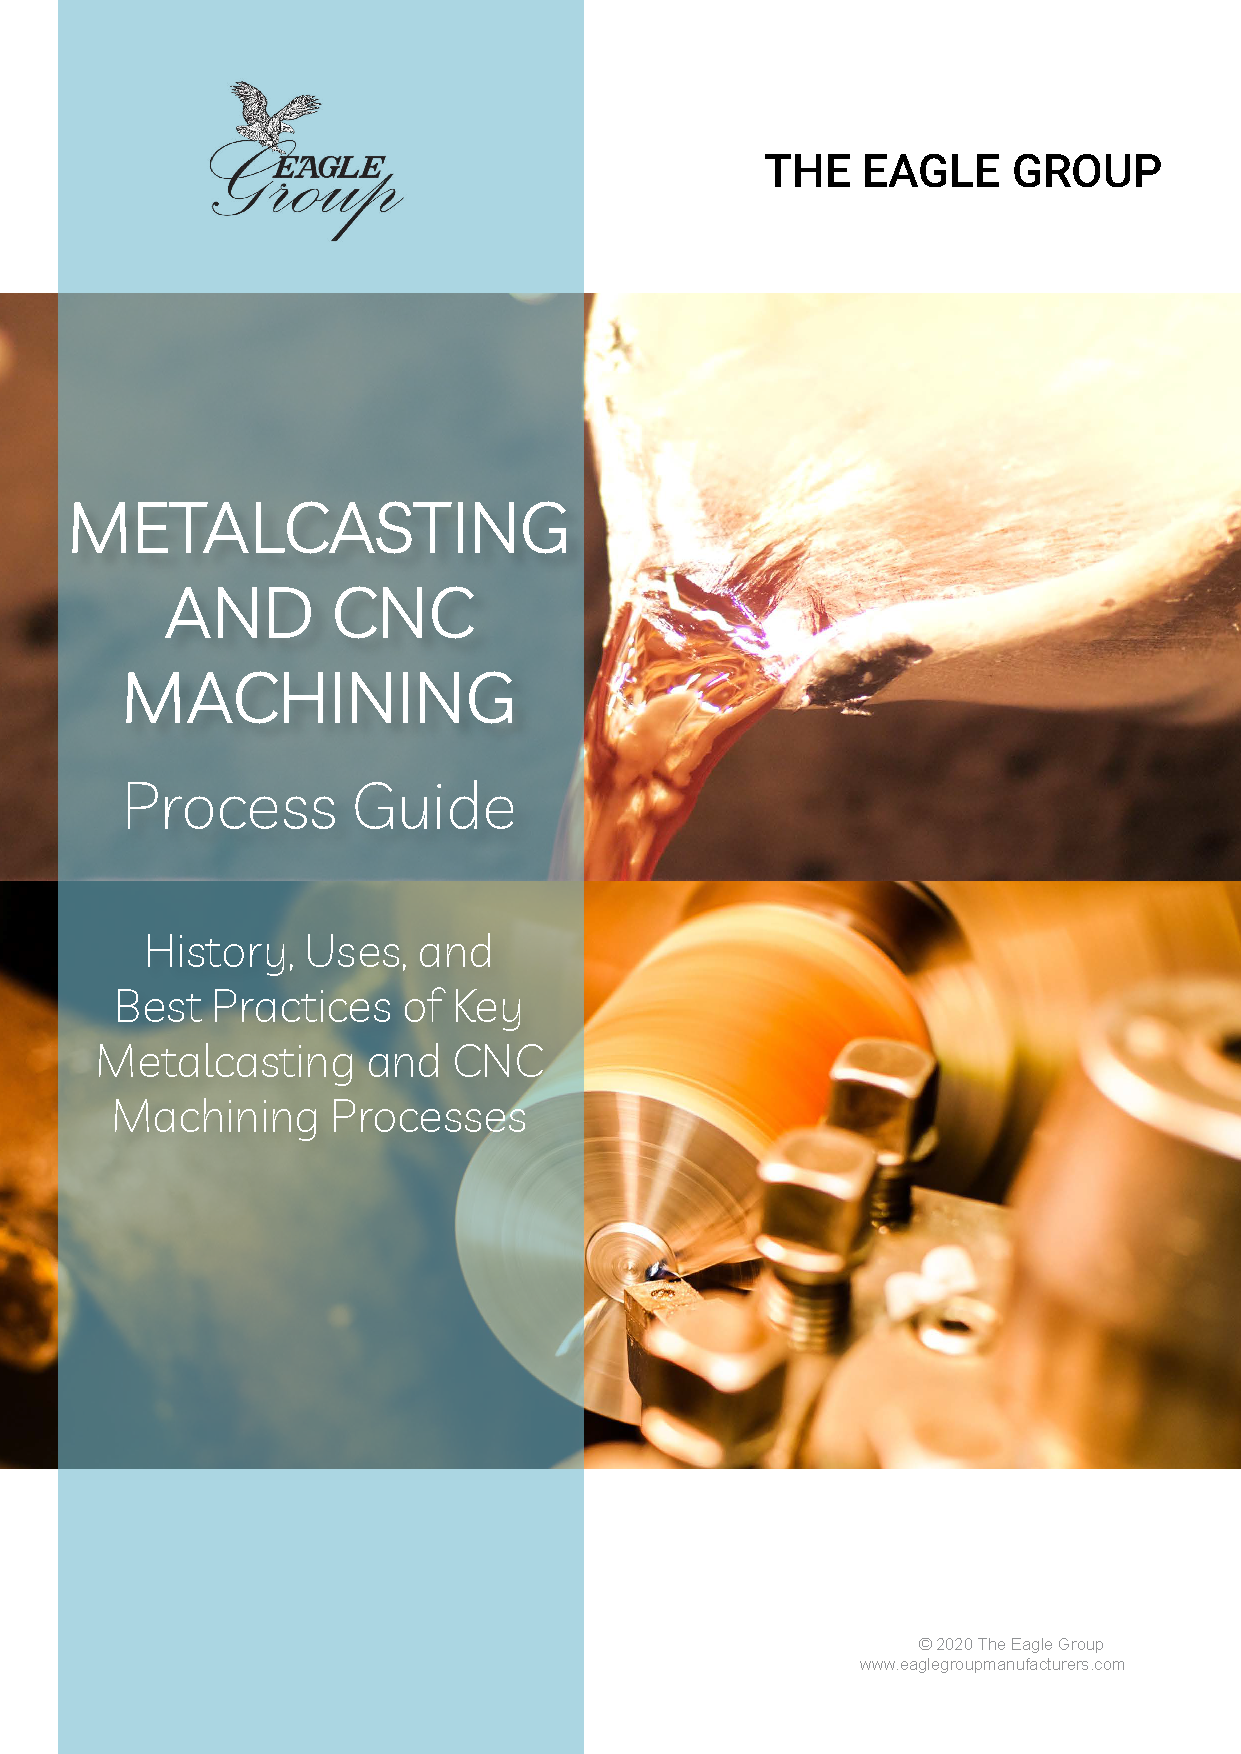 History, Uses, and Best Practices of Key Metalcasting and CNC Machining Processes